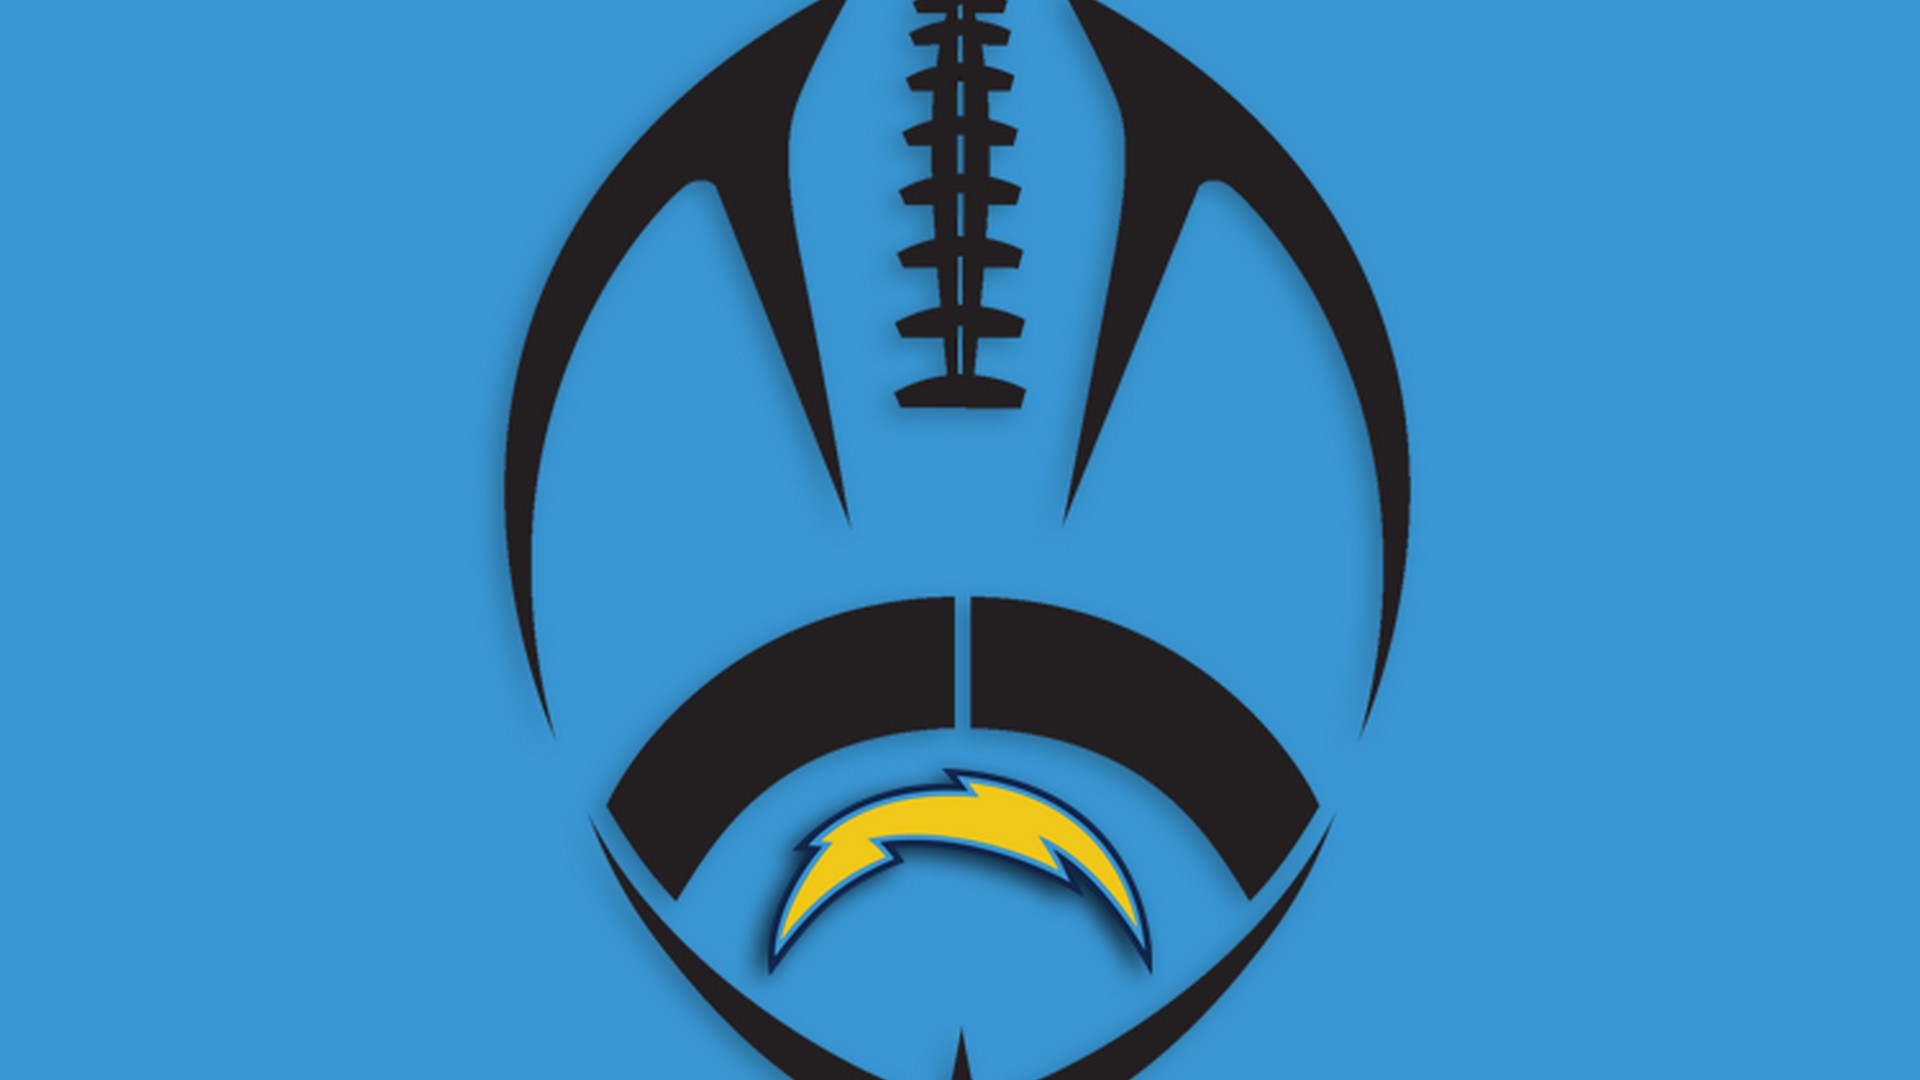 HD Backgrounds Los Angeles Chargers with resolution 1920x1080 pixel. You can make this wallpaper for your Mac or Windows Desktop Background, iPhone, Android or Tablet and another Smartphone device